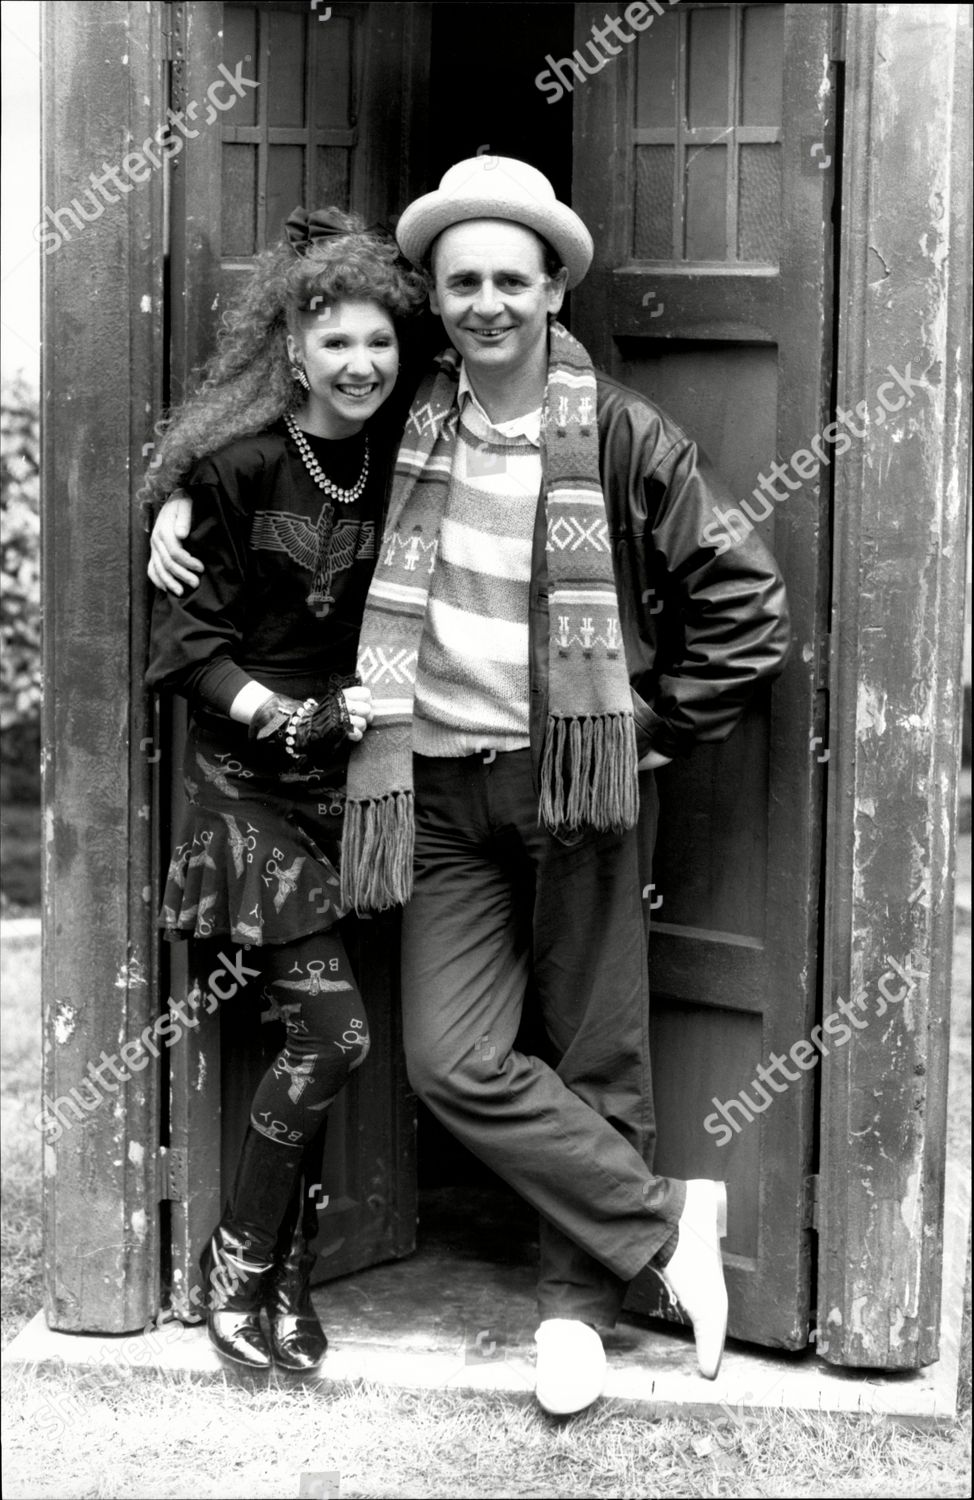 the-new-dr-who-shakespearean-actor-sylvester-mccoy-with-bonnie-langford-aboard-the-tardis-in-london-he-is-the-7th-dr-who-shutterstock-editorial-1446077ab.jpg